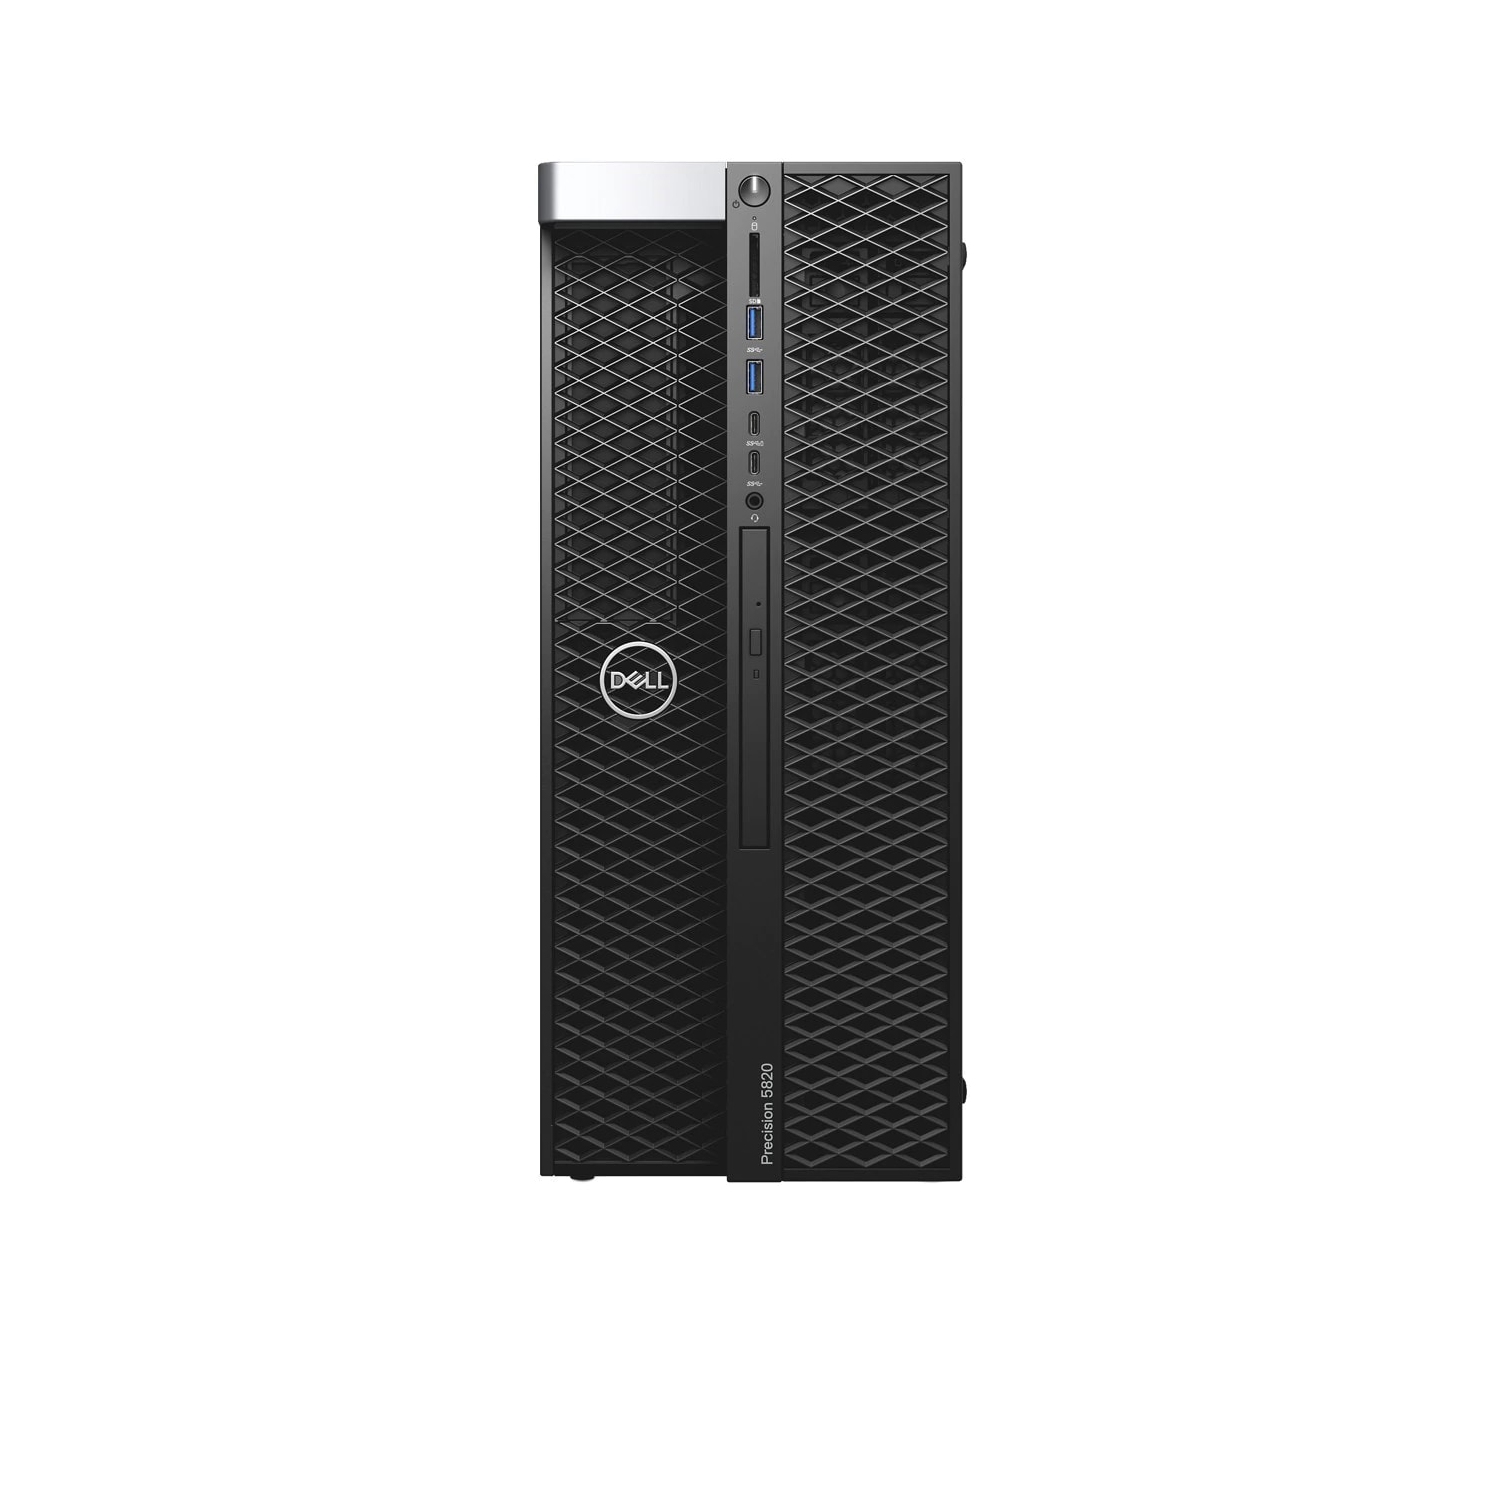 Refurbished (Excellent) - Dell Precision T5820 Workstation Desktop (2018), Core i9, 2TB HDD, 32GB RAM, RTX 5000, 18 Cores @ 4.6 GHz, 10th Gen CPU Certified Refurbished